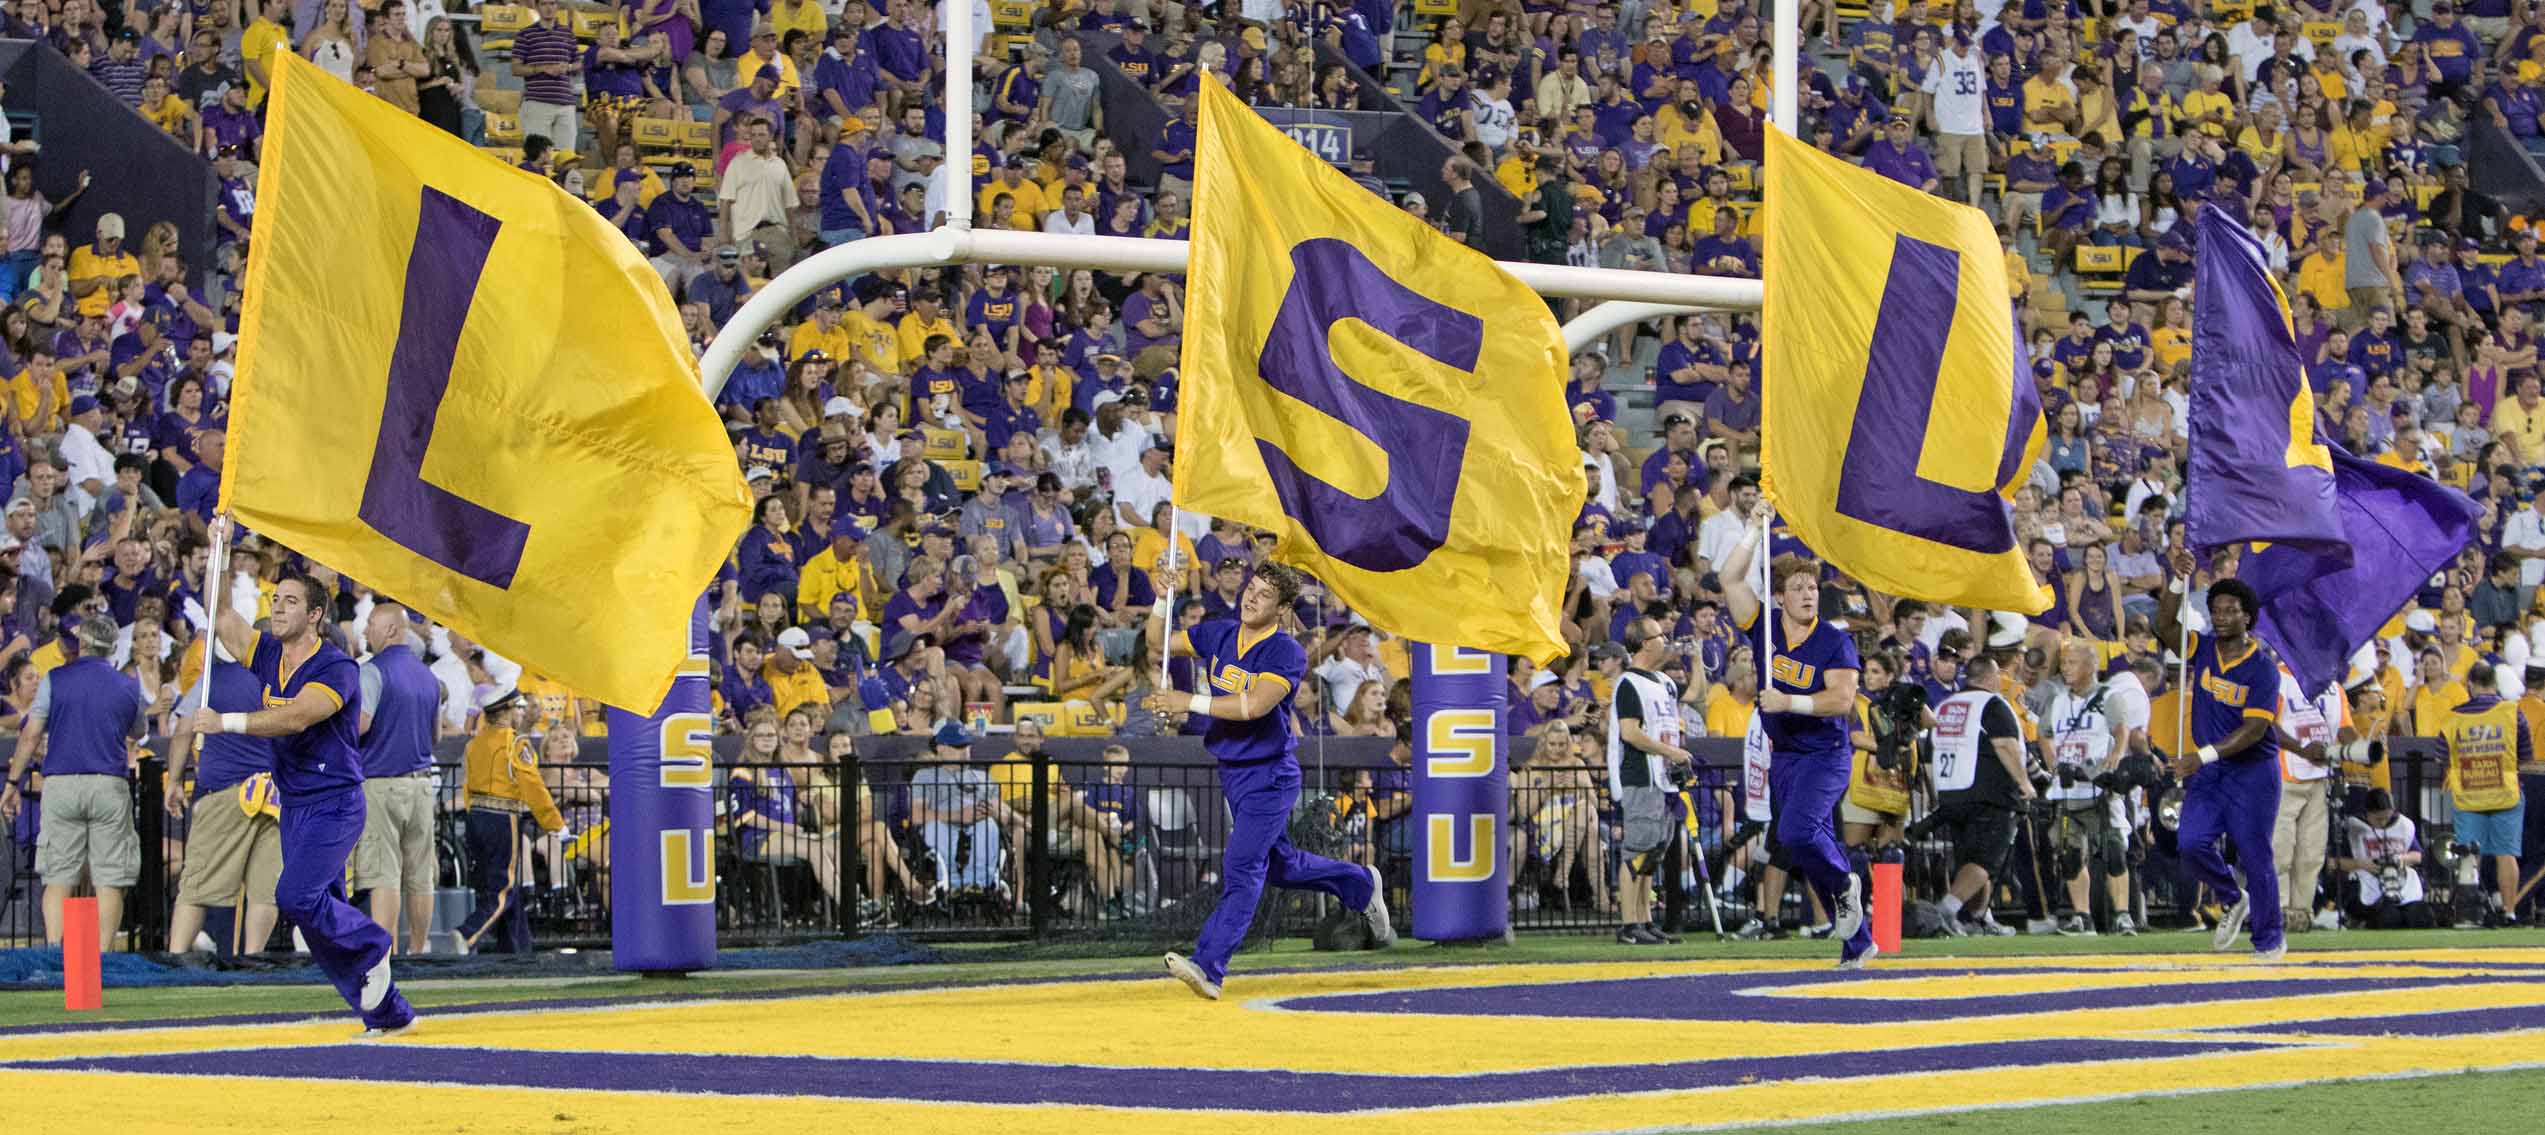 TIGERS TO HOST ‘LSU STUDENT DAY’ AT FOOTBALL PRACTICE ON APRIL 20